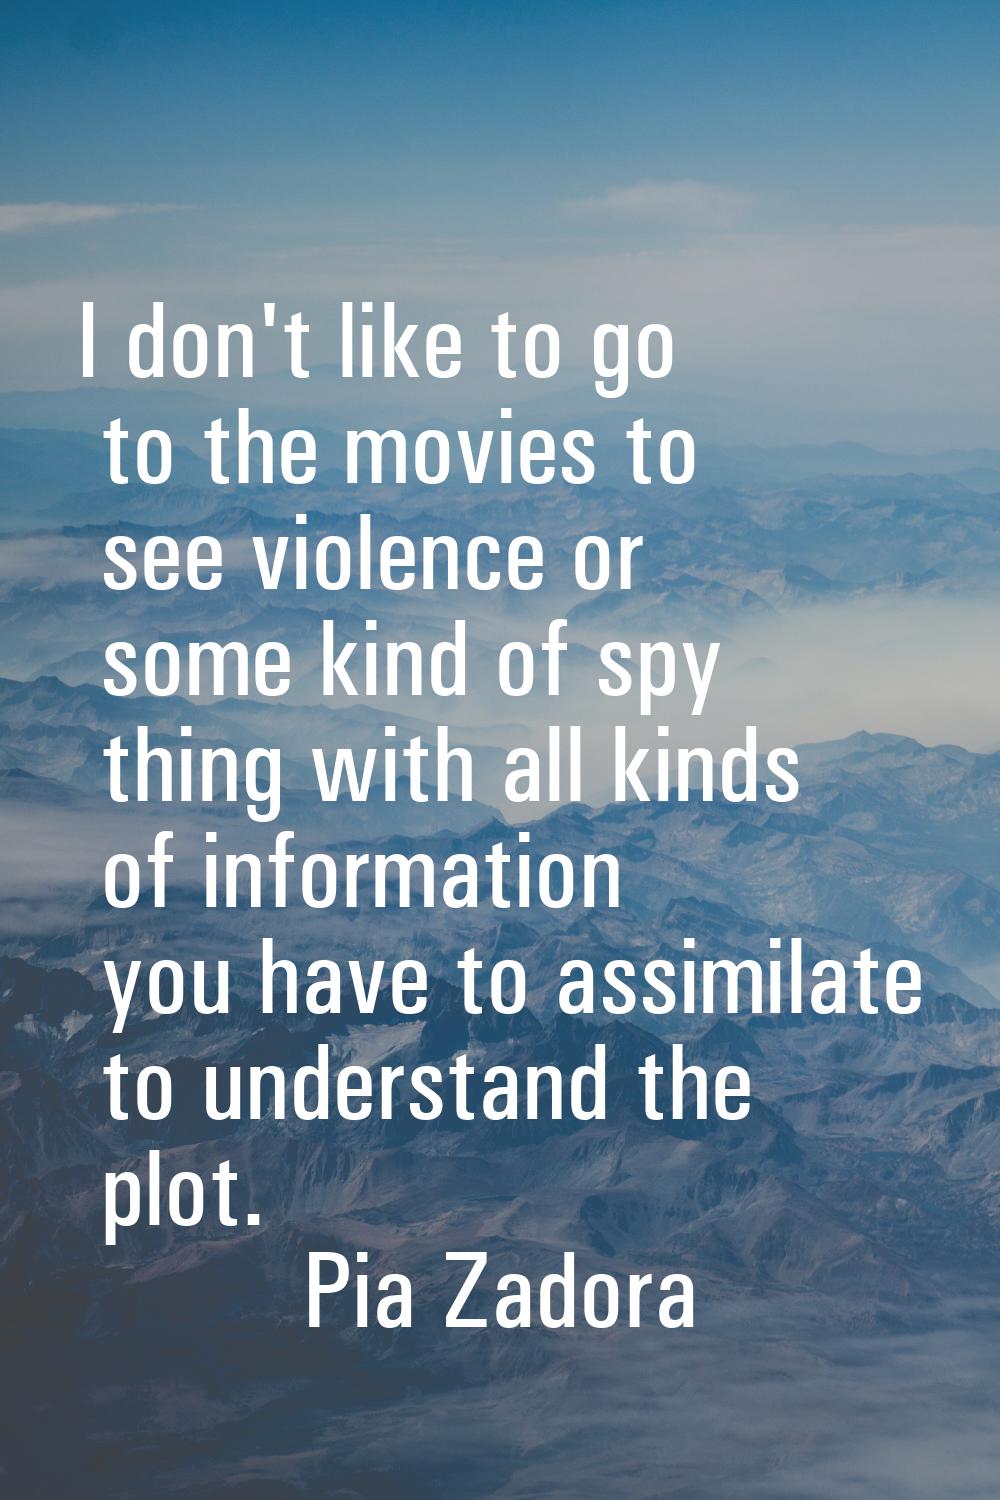 I don't like to go to the movies to see violence or some kind of spy thing with all kinds of inform